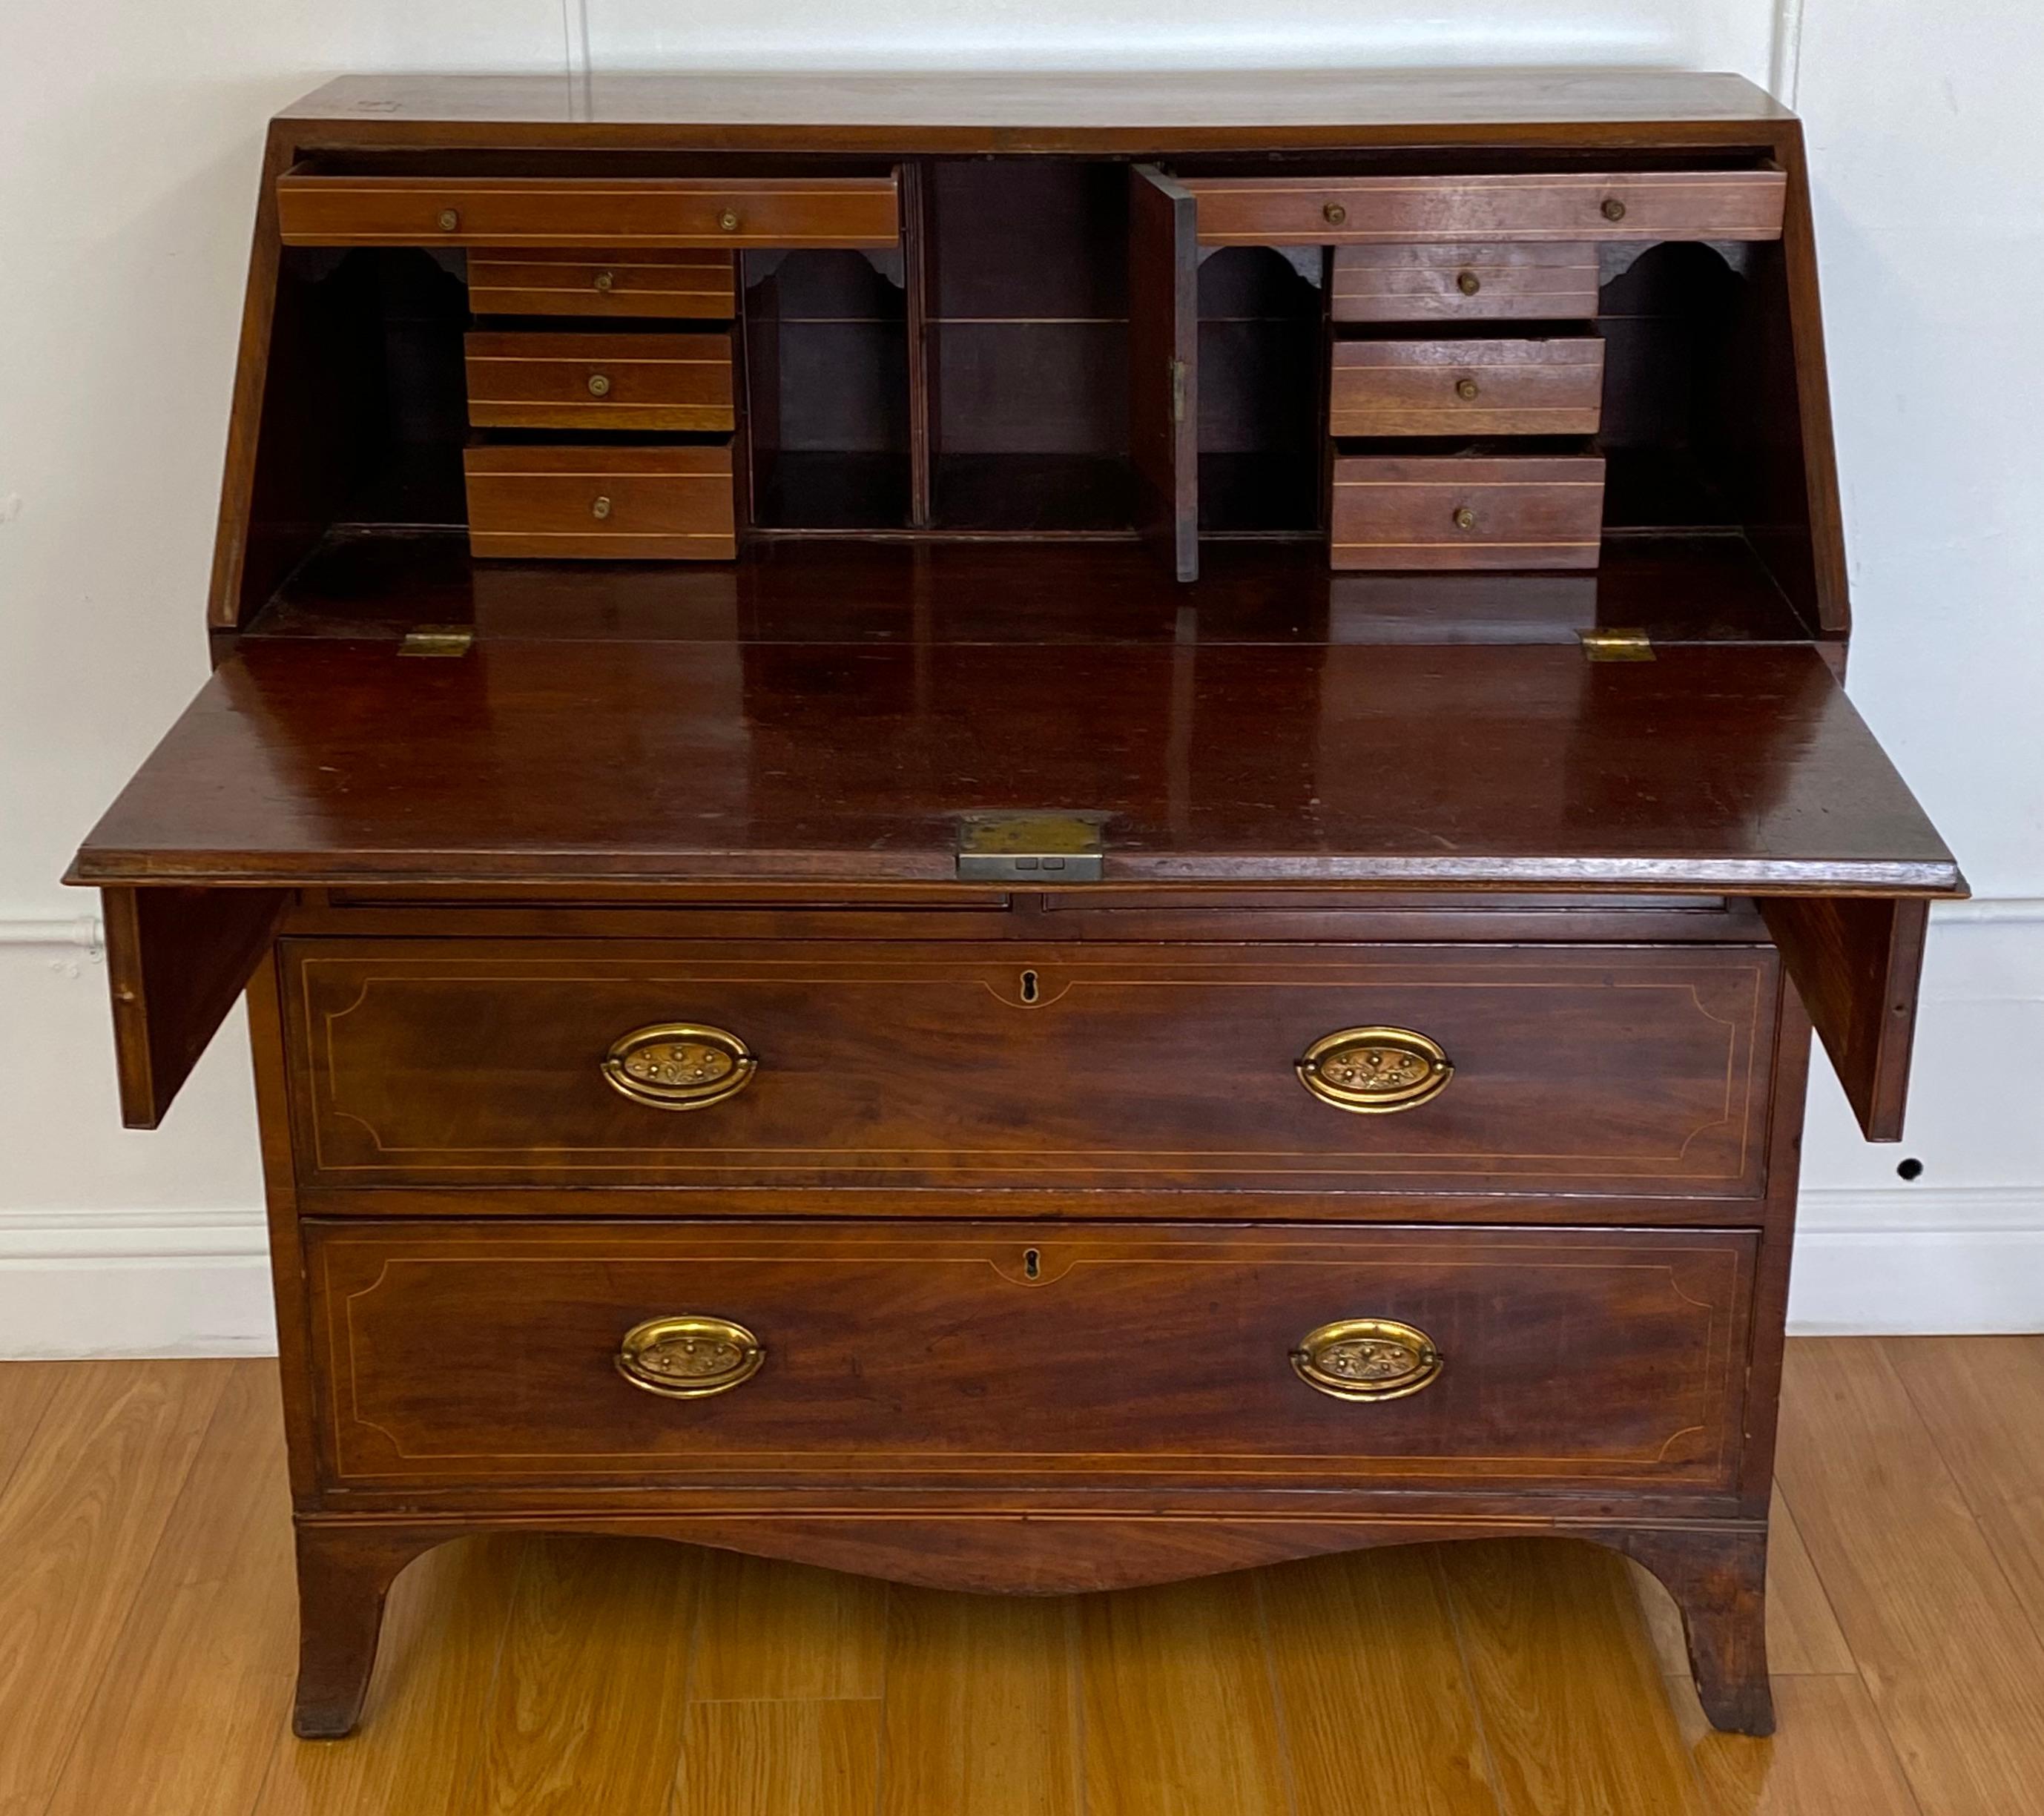 19th Century Walnut and Mahogany Drop Front Bureau Desk For Sale at 1stDibs